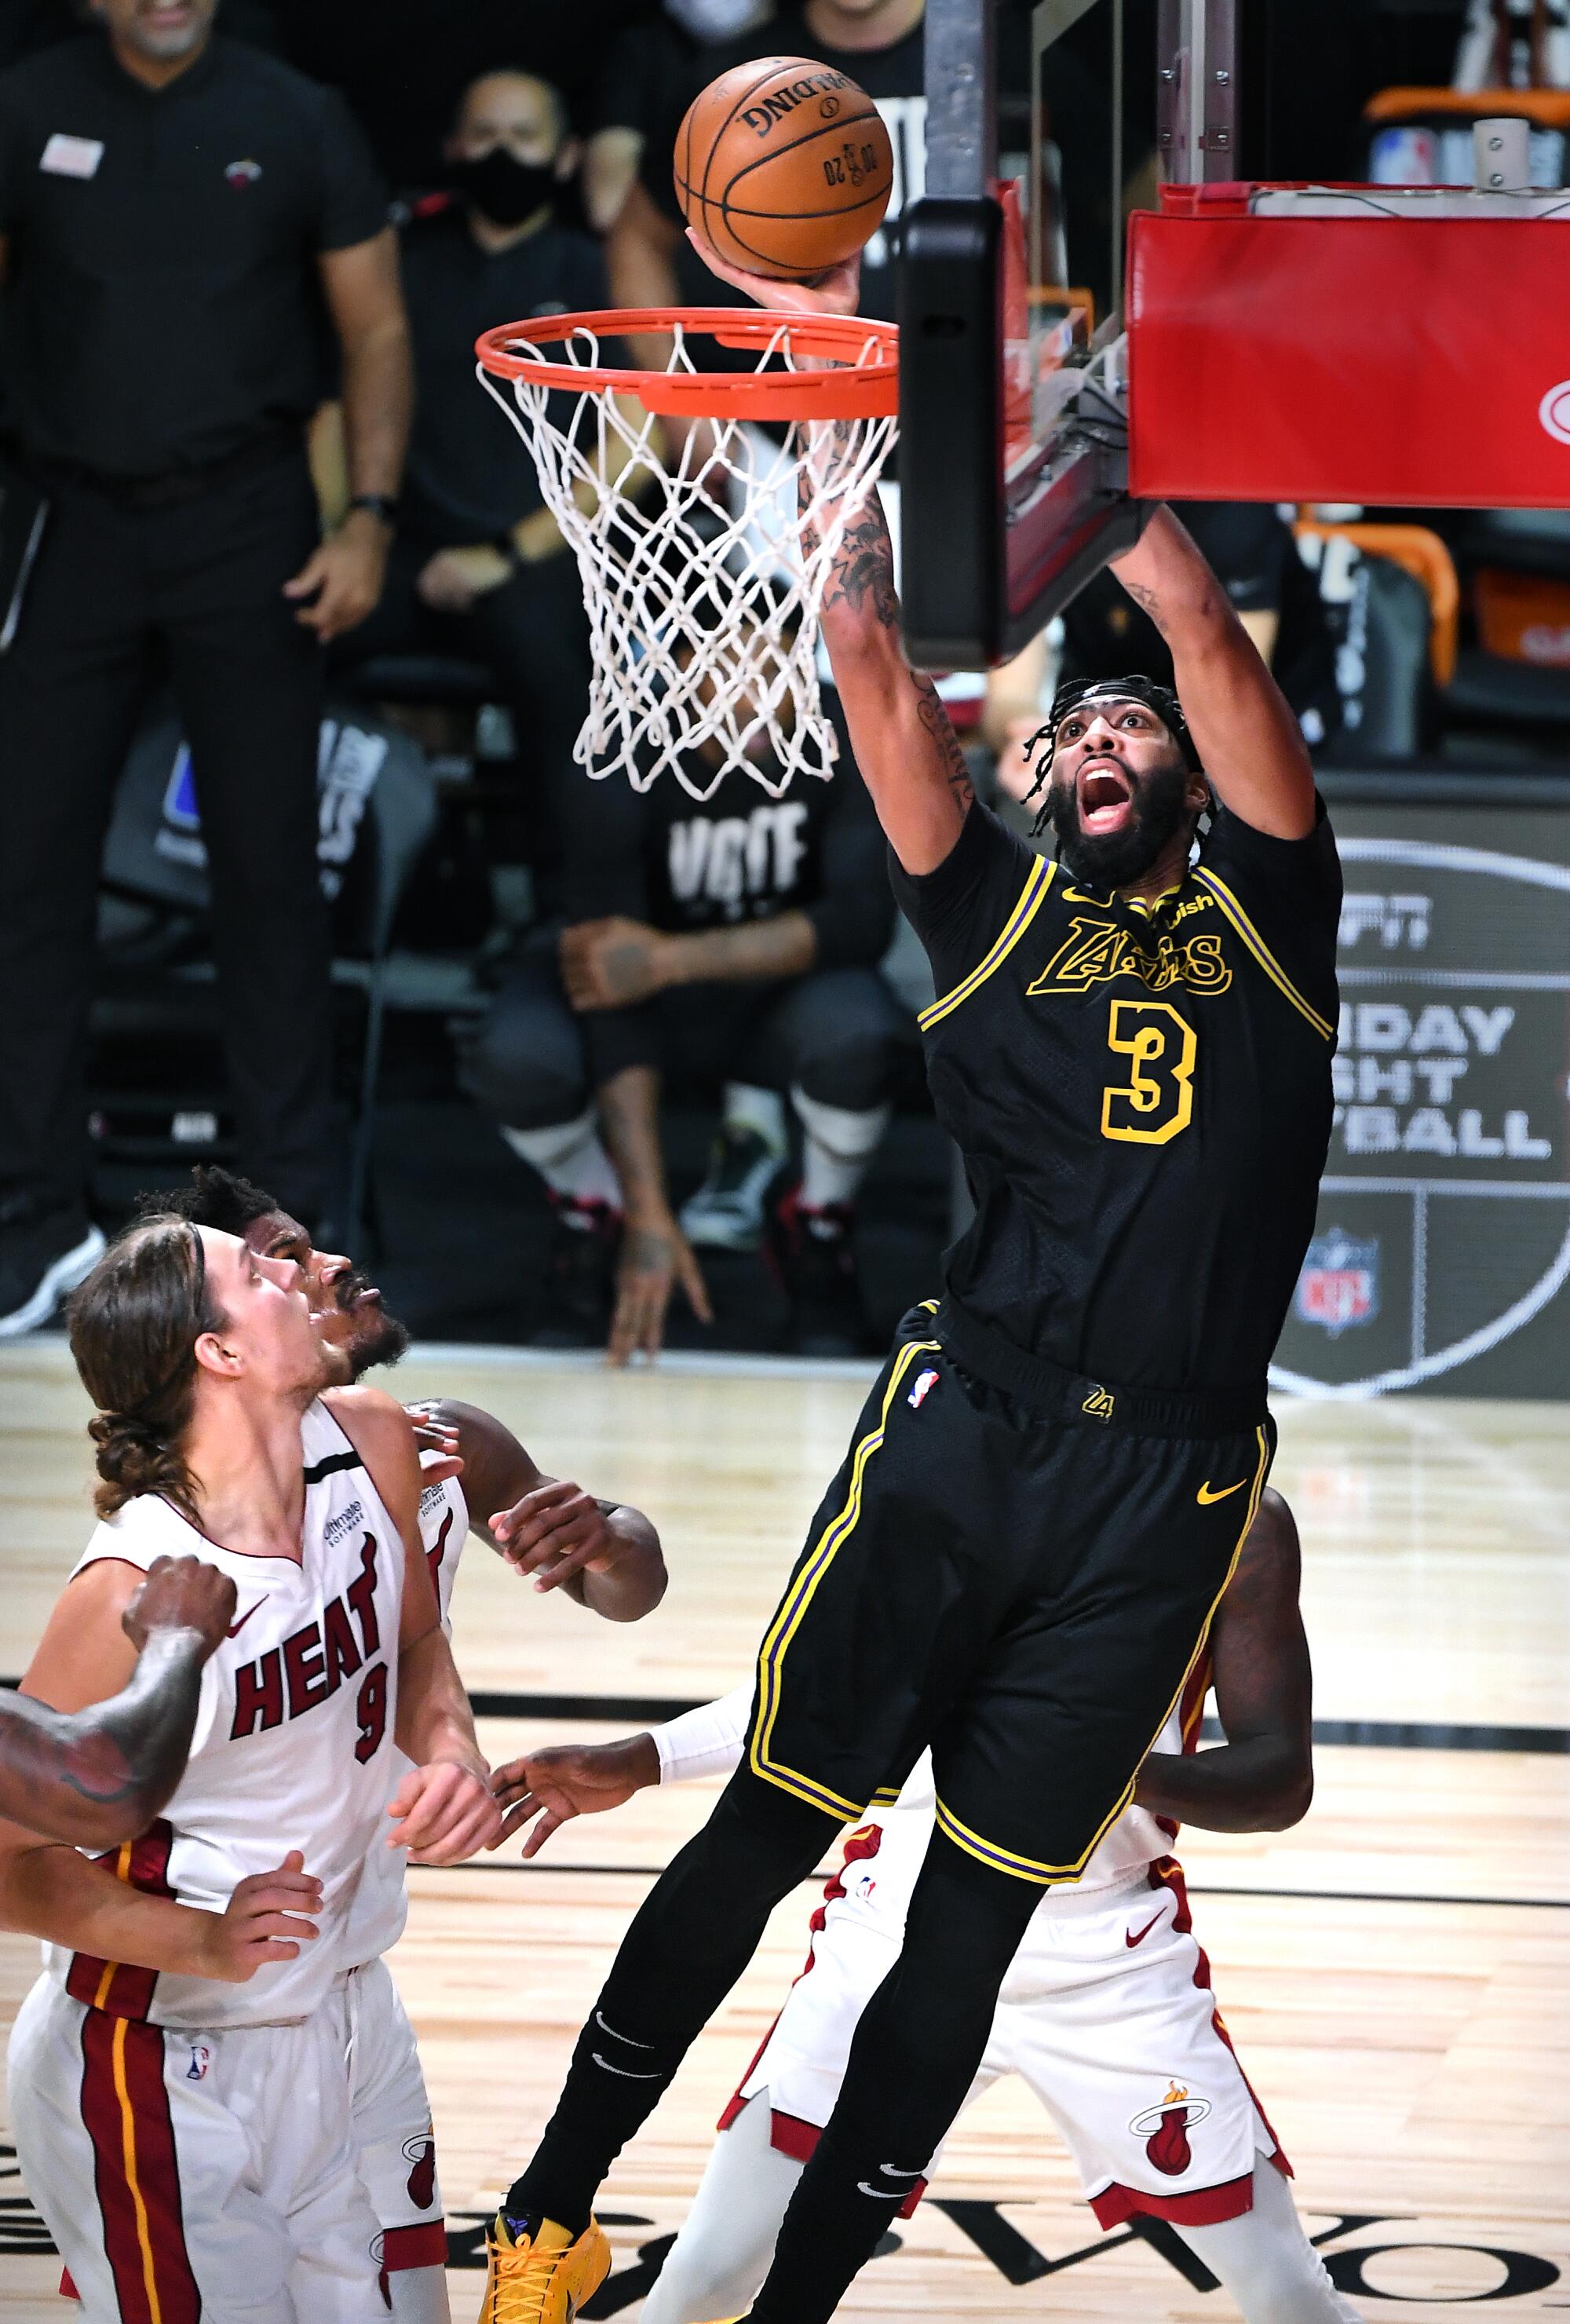 Lakers forward Anthony Davis scores a basket over the Miami defense in Game 2 of the NBA Finals.